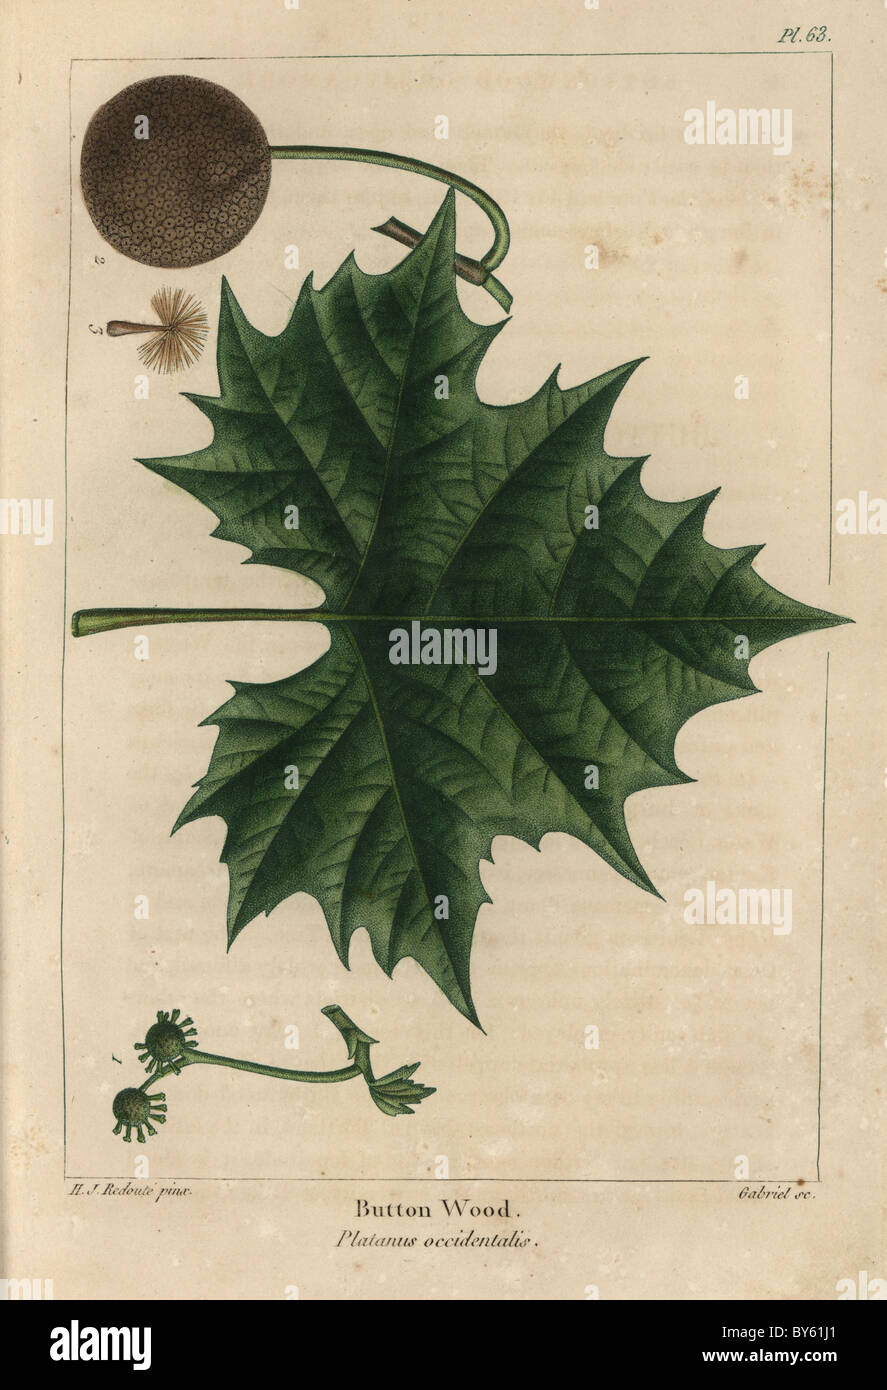 Leaf, fruit, flower and seed of the Buttonwood or sycamore maple tree ...